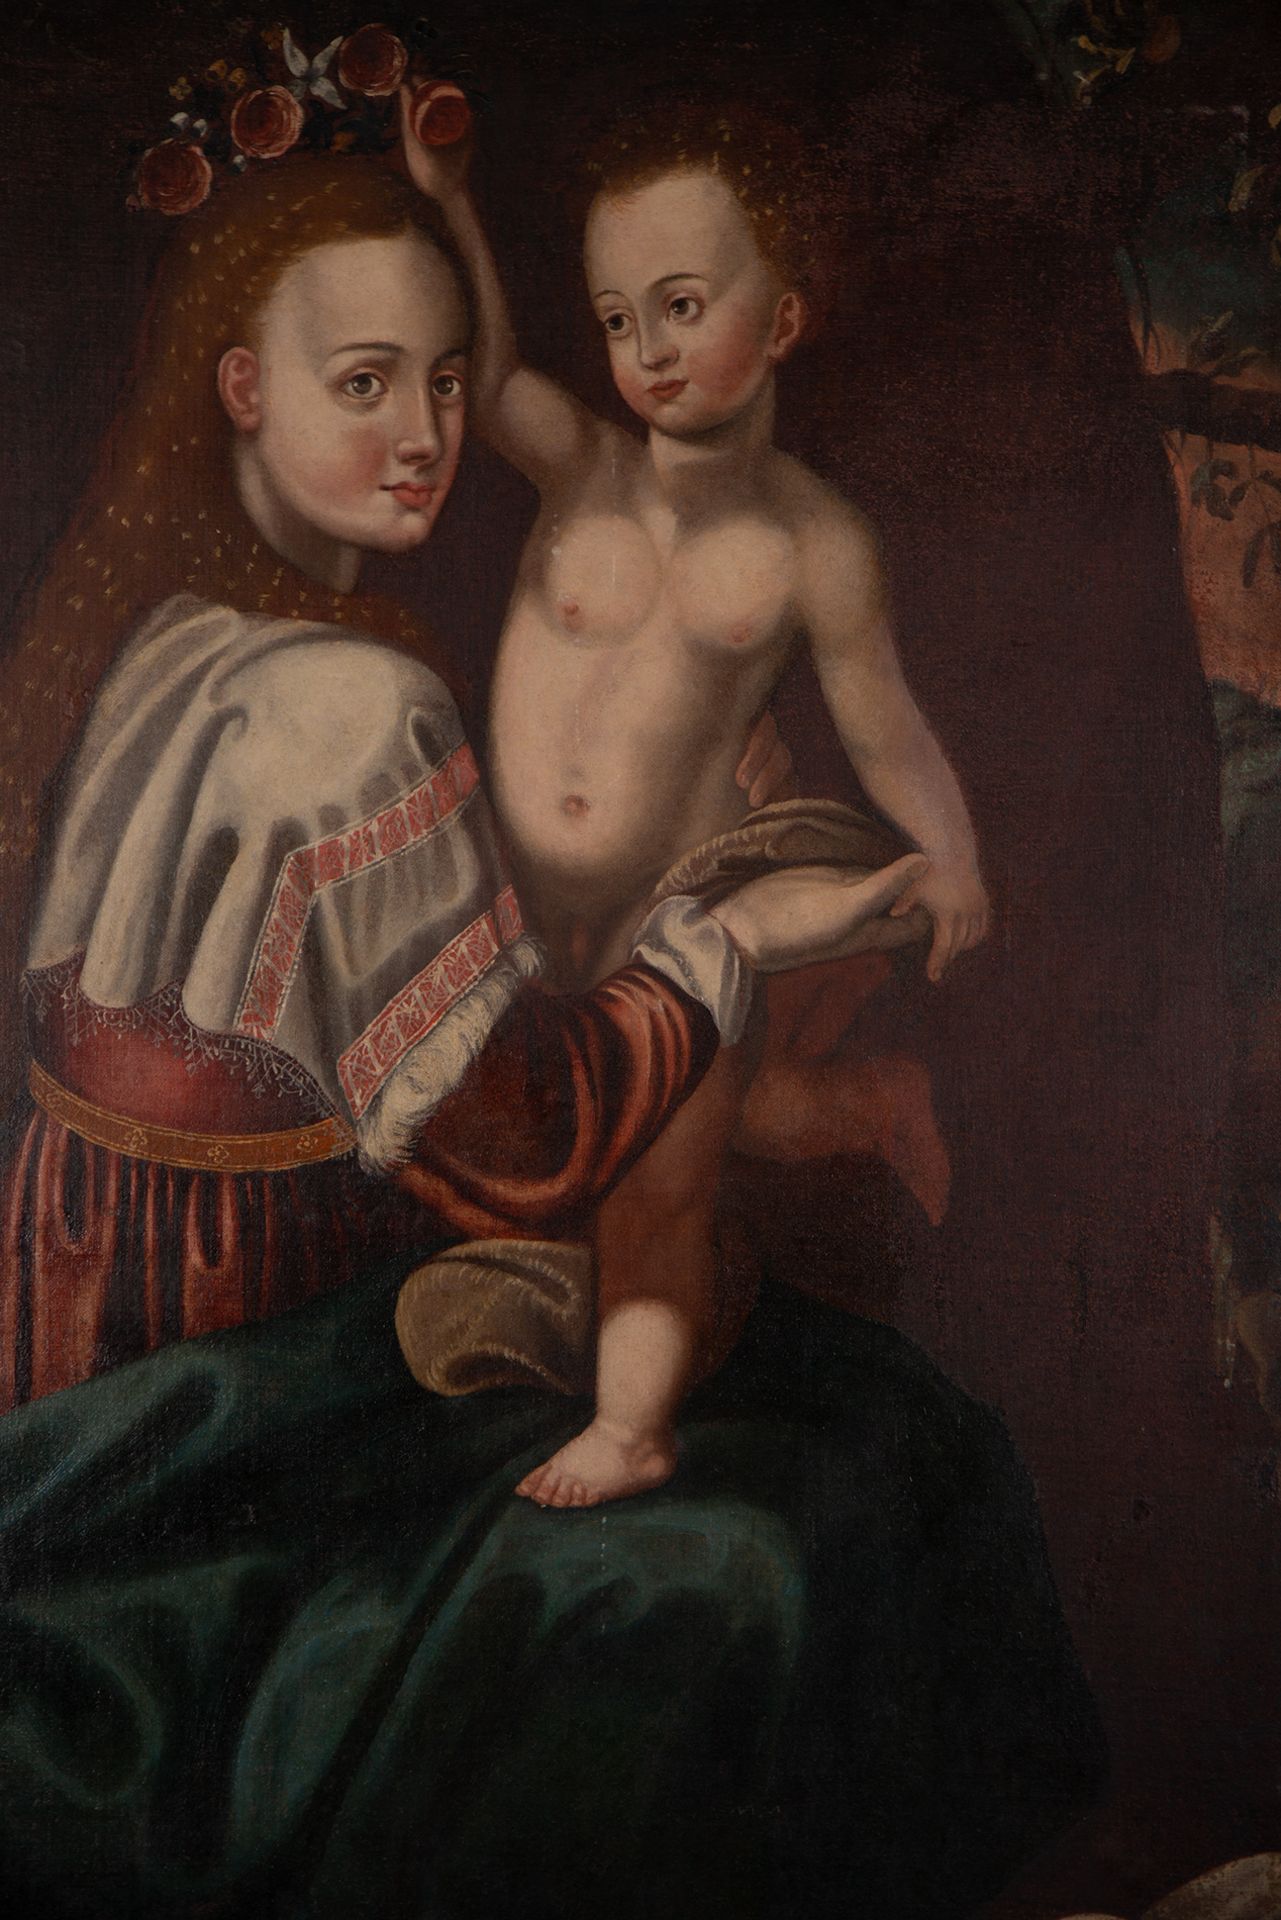 Virgin with Child in her arms, Italian school of the 17th century - Image 3 of 10